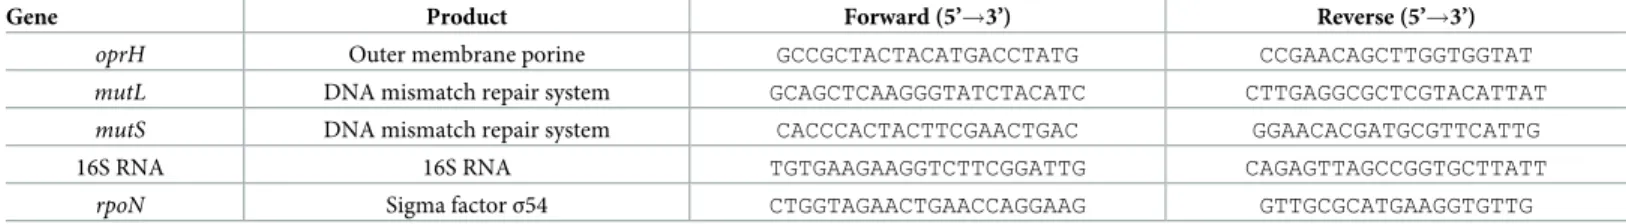 Table 1. Oligonucleotides used for the analysis by RT-PCR and RT-qPCR.